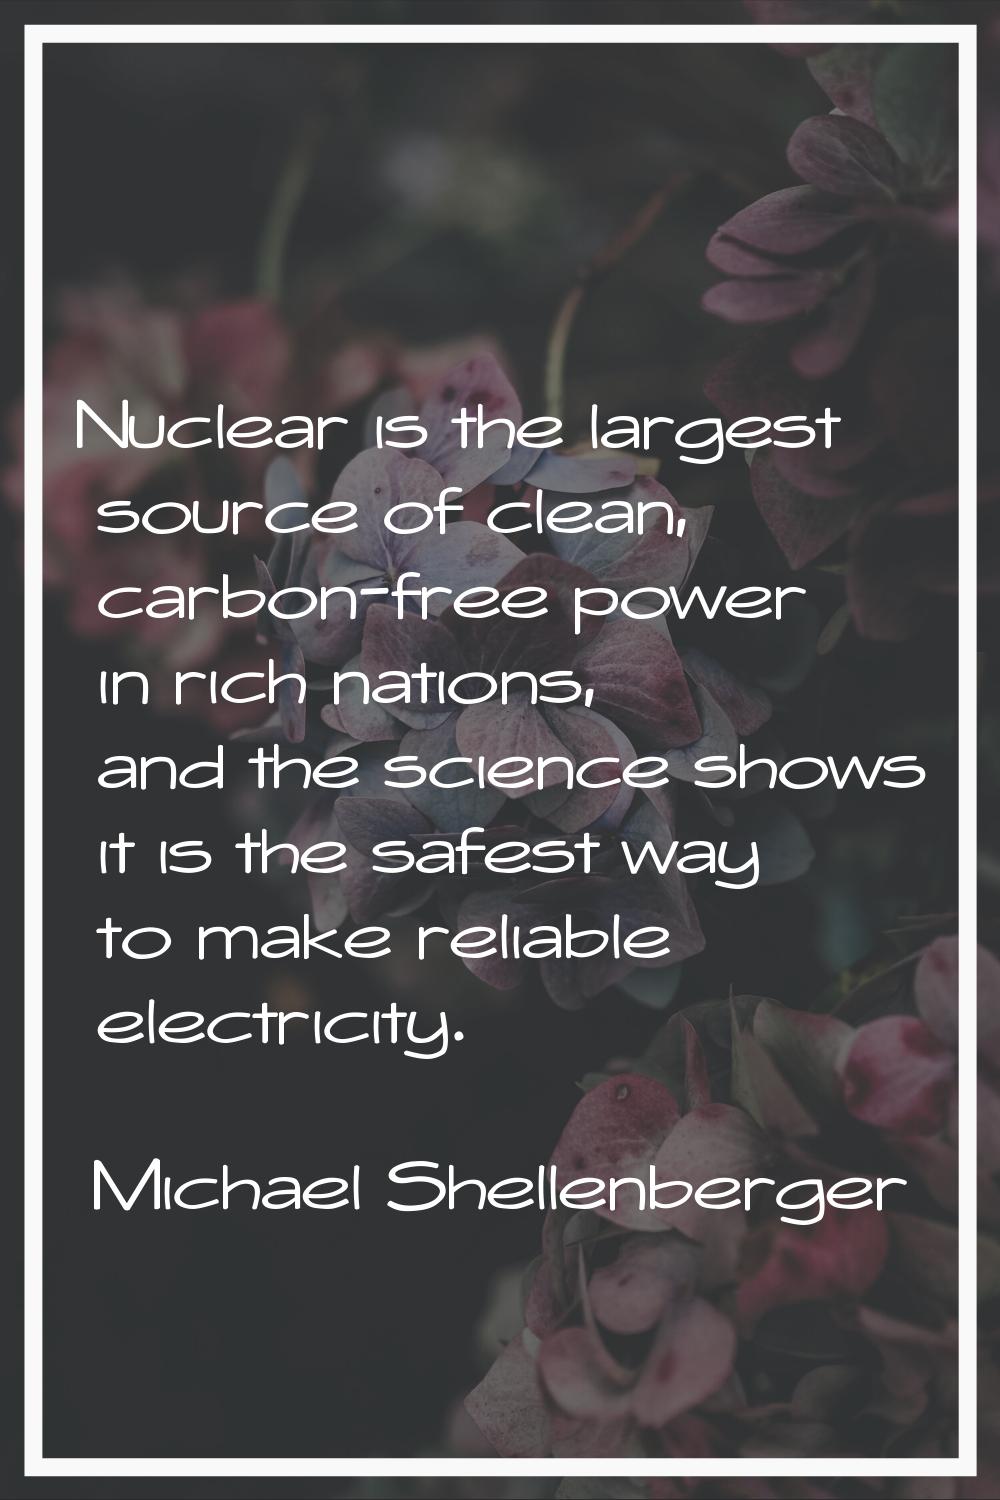 Nuclear is the largest source of clean, carbon-free power in rich nations, and the science shows it